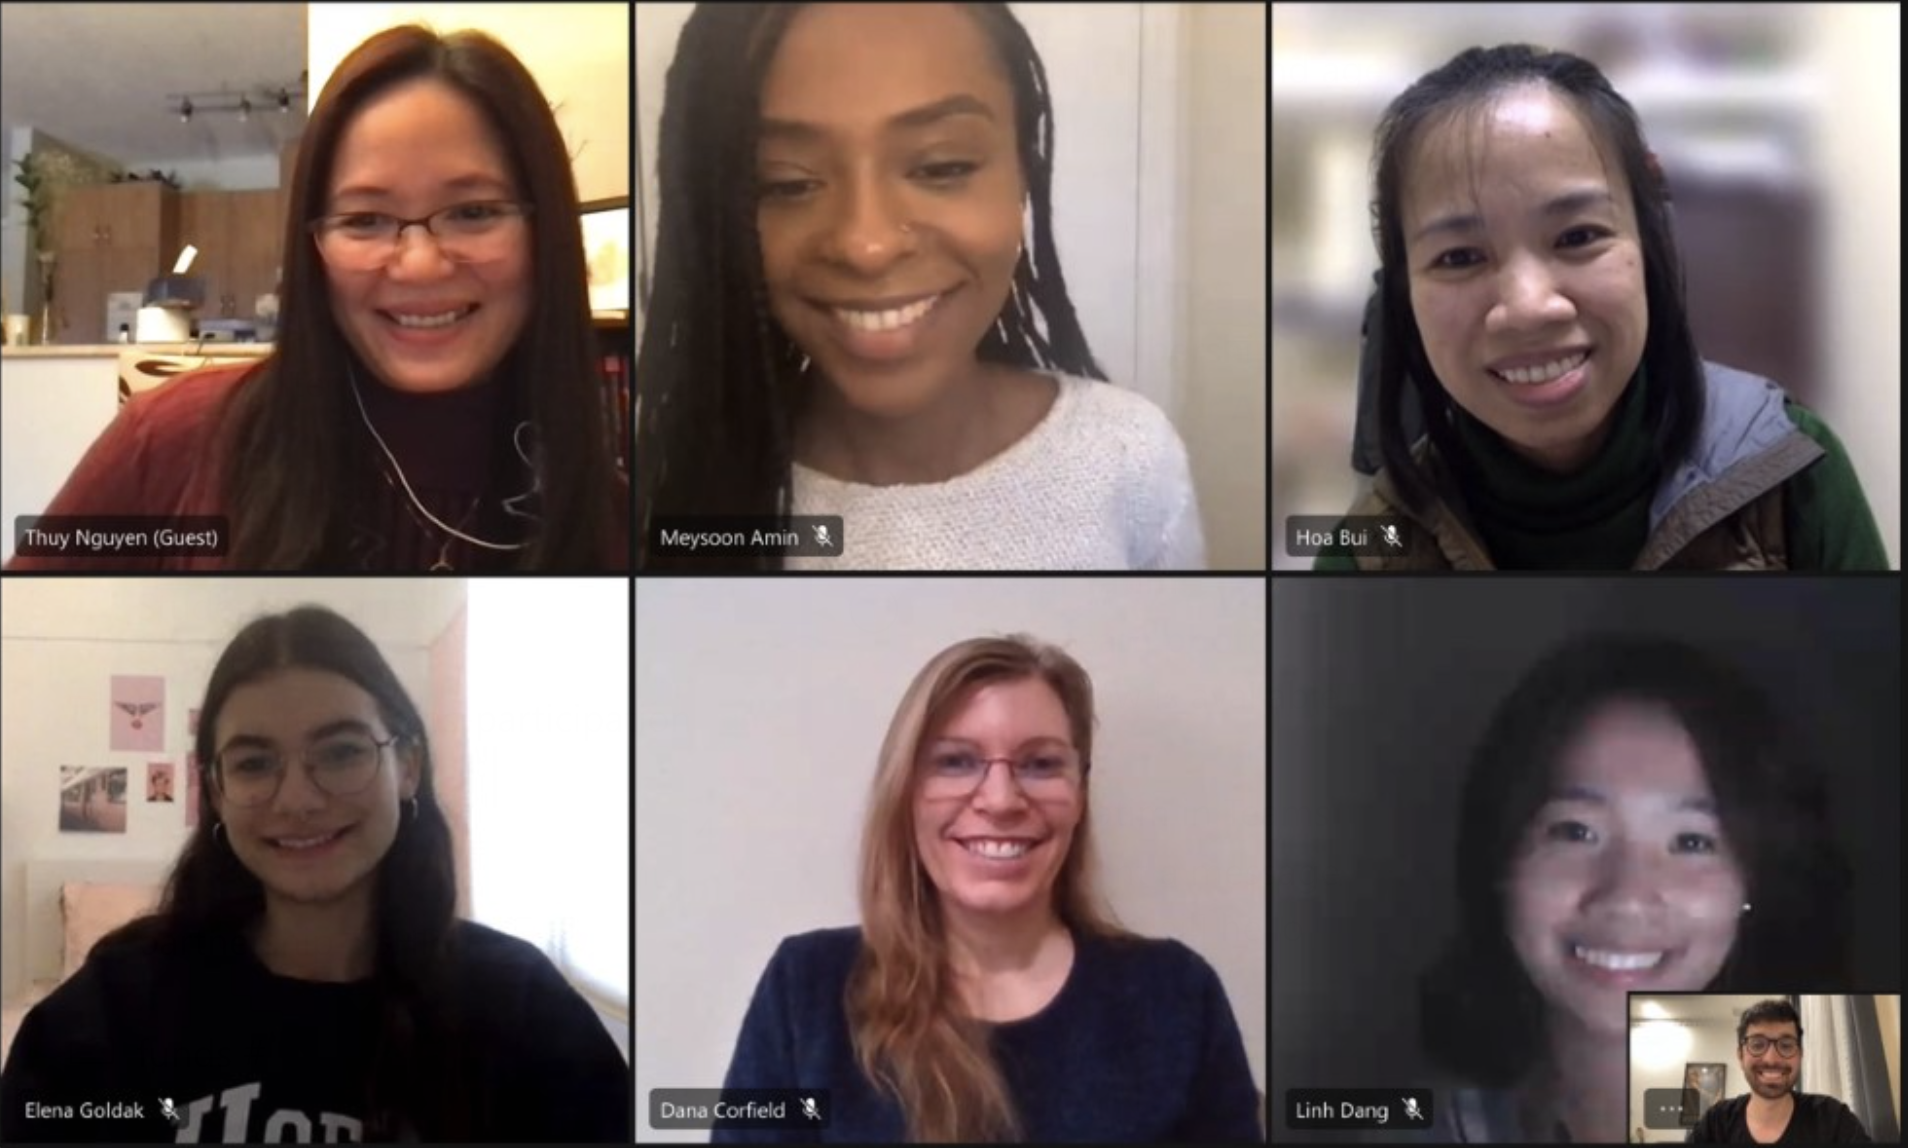 The image shows a screenshot from a Microsoft Teams meeting. It has 6 big windows and 1 small small in lower right corner hosting the image of each member of the DDSC team. The Team members are Dr. Xuan Thy Nguyen, Meysoon Amin, Hoa Bui, Elena Goldak, Dana Corfield, Linh Dang, and Fayssal Yatim